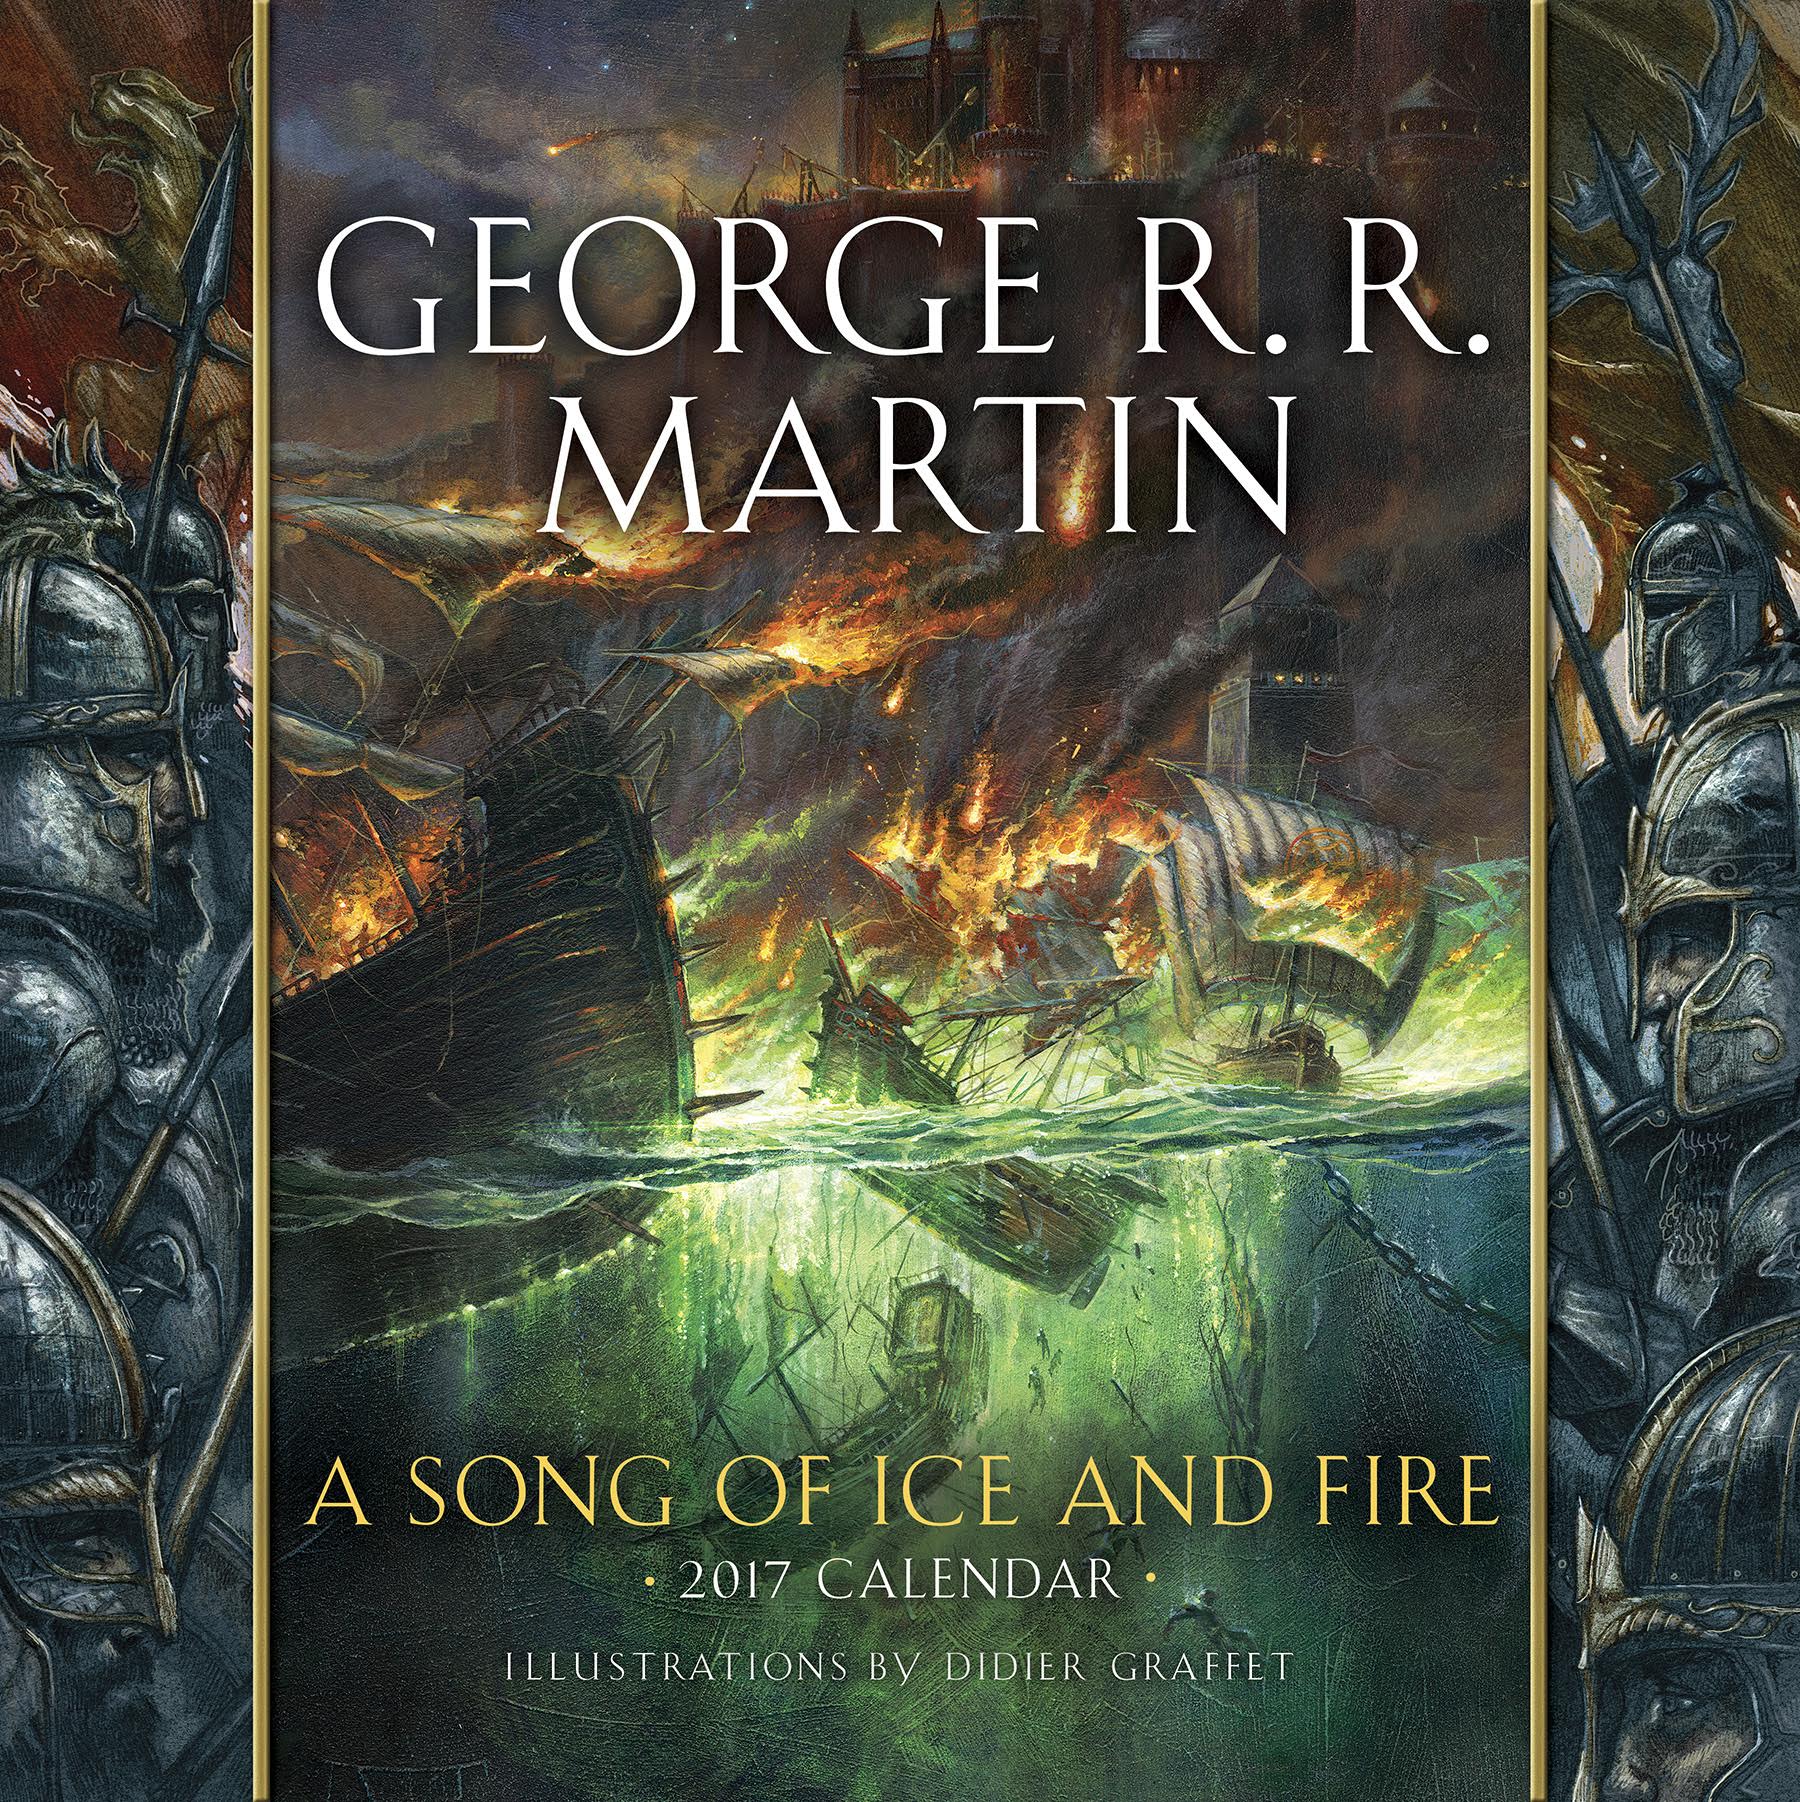 The World Of Ice & Fire Wallpapers